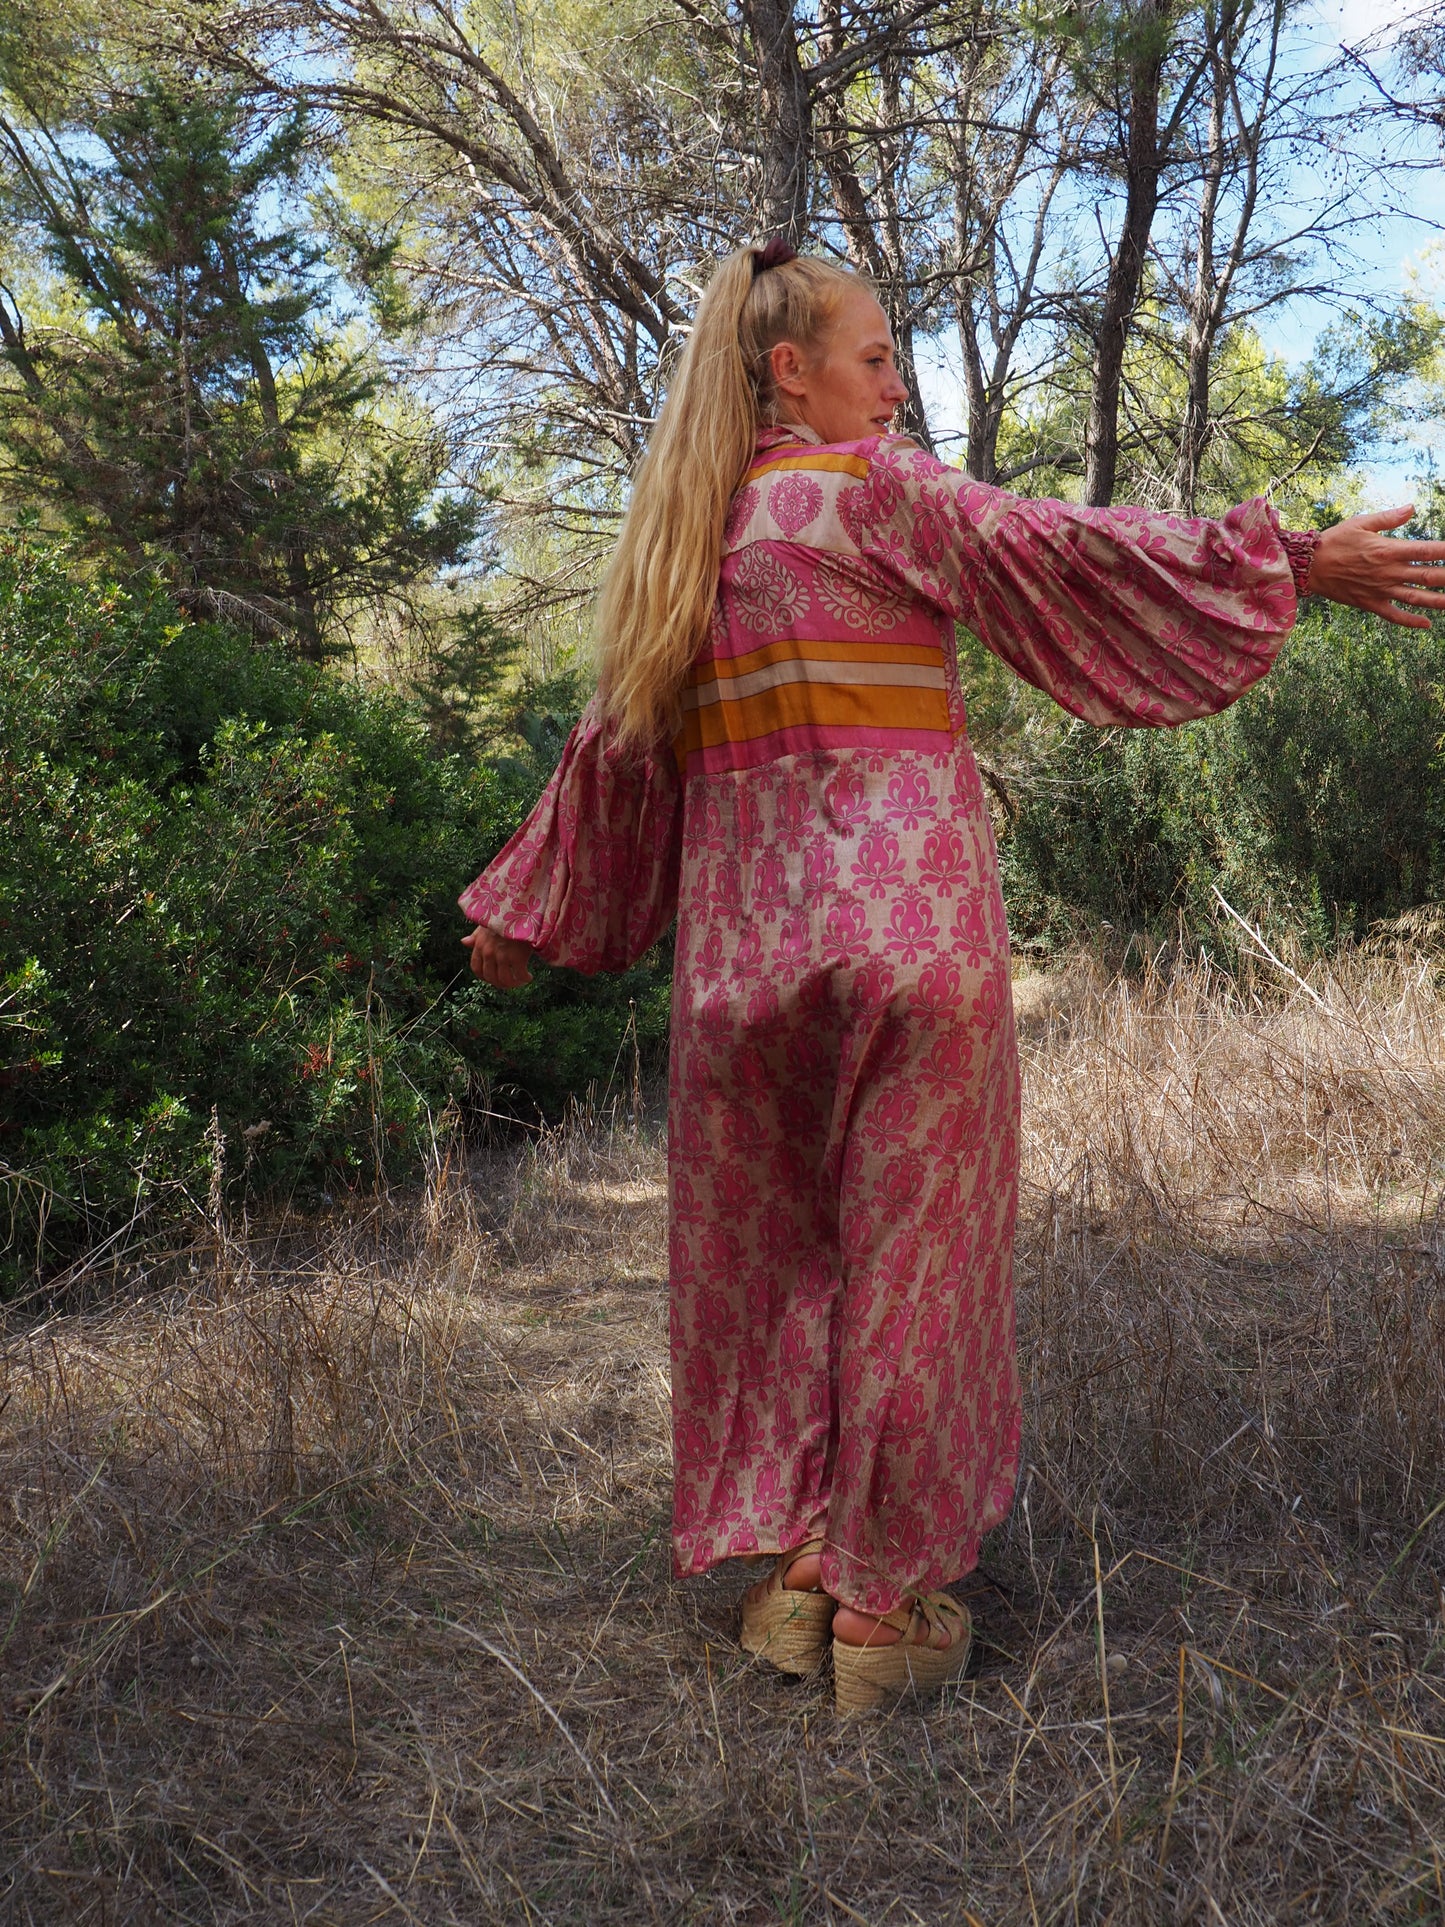 The Llenya dress Vintage Indian sari dress with oversized sleeves up-cycled by Vagabond Ibiza